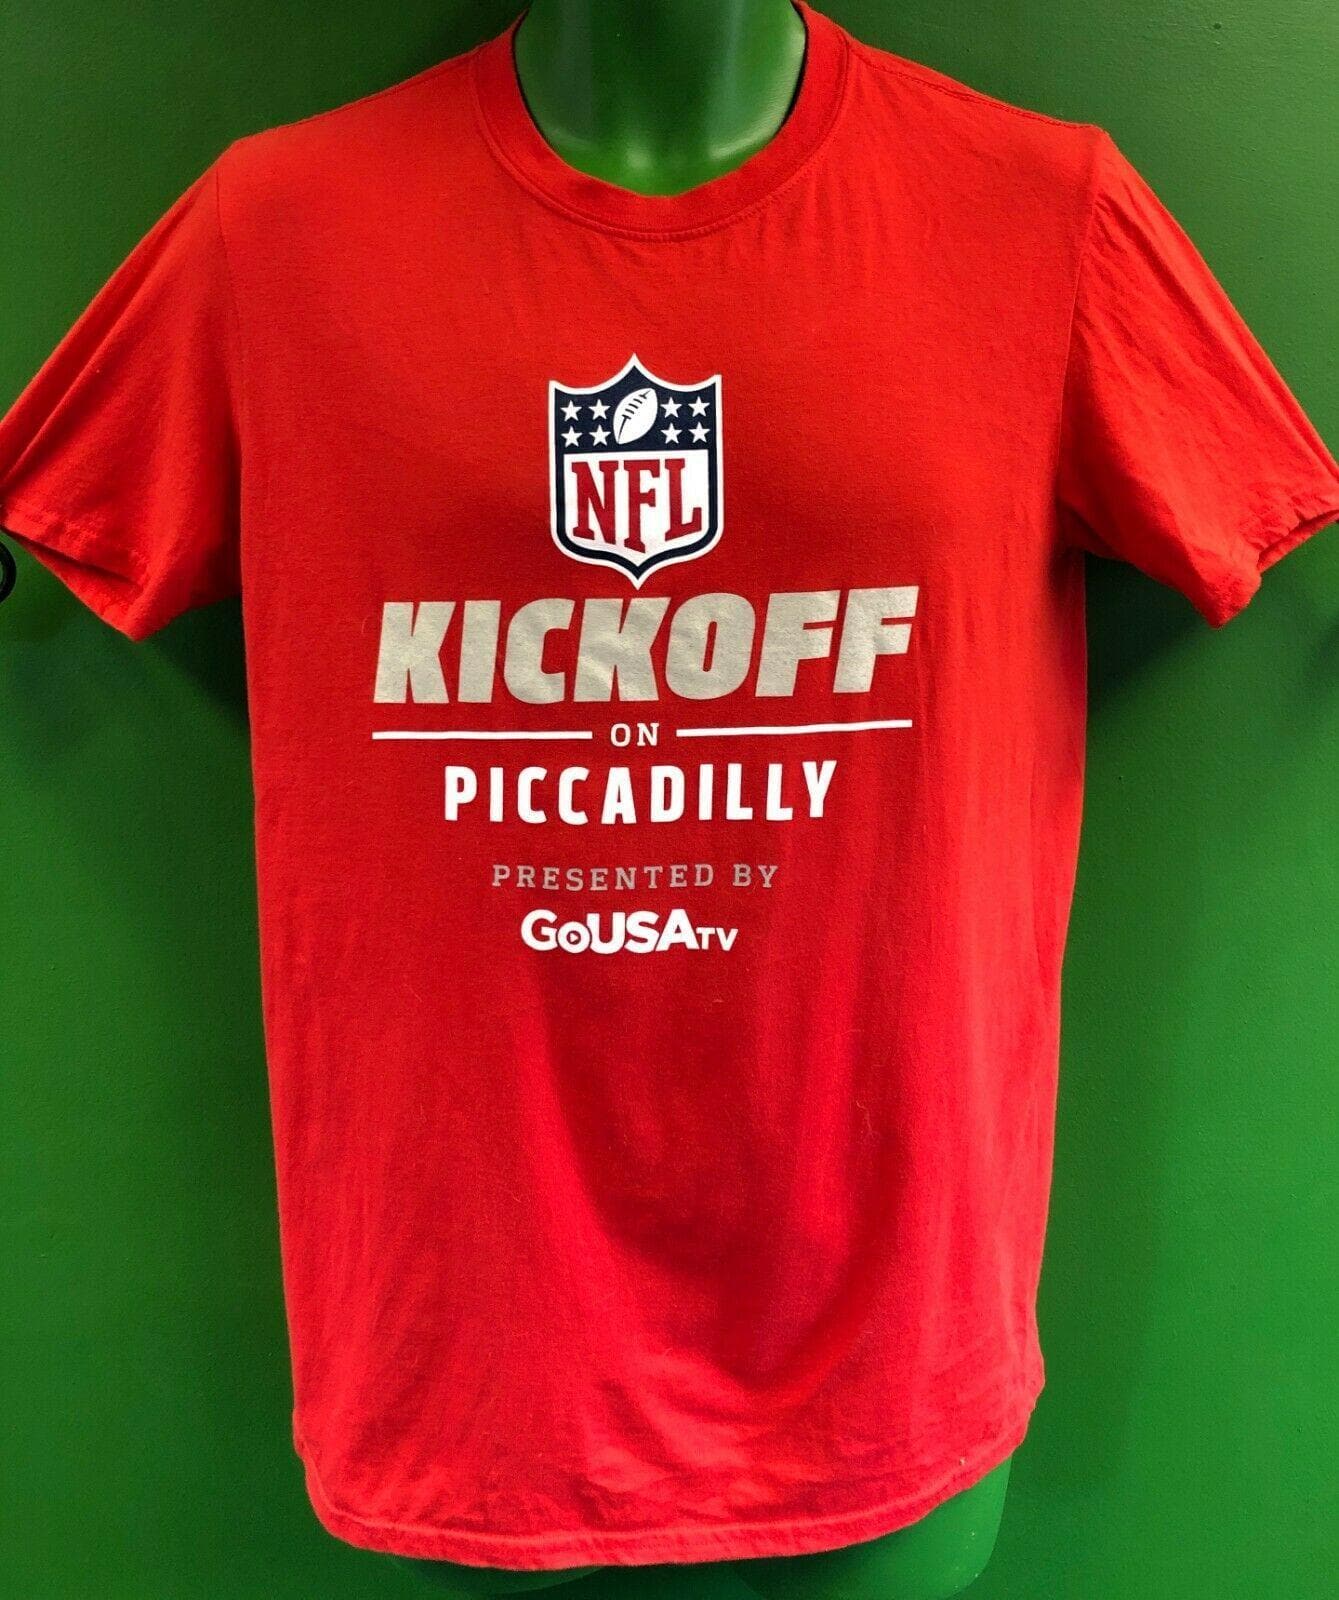 NFL Kickoff on Piccadilly 2018 Red T-Shirt Unisex Medium NWOT